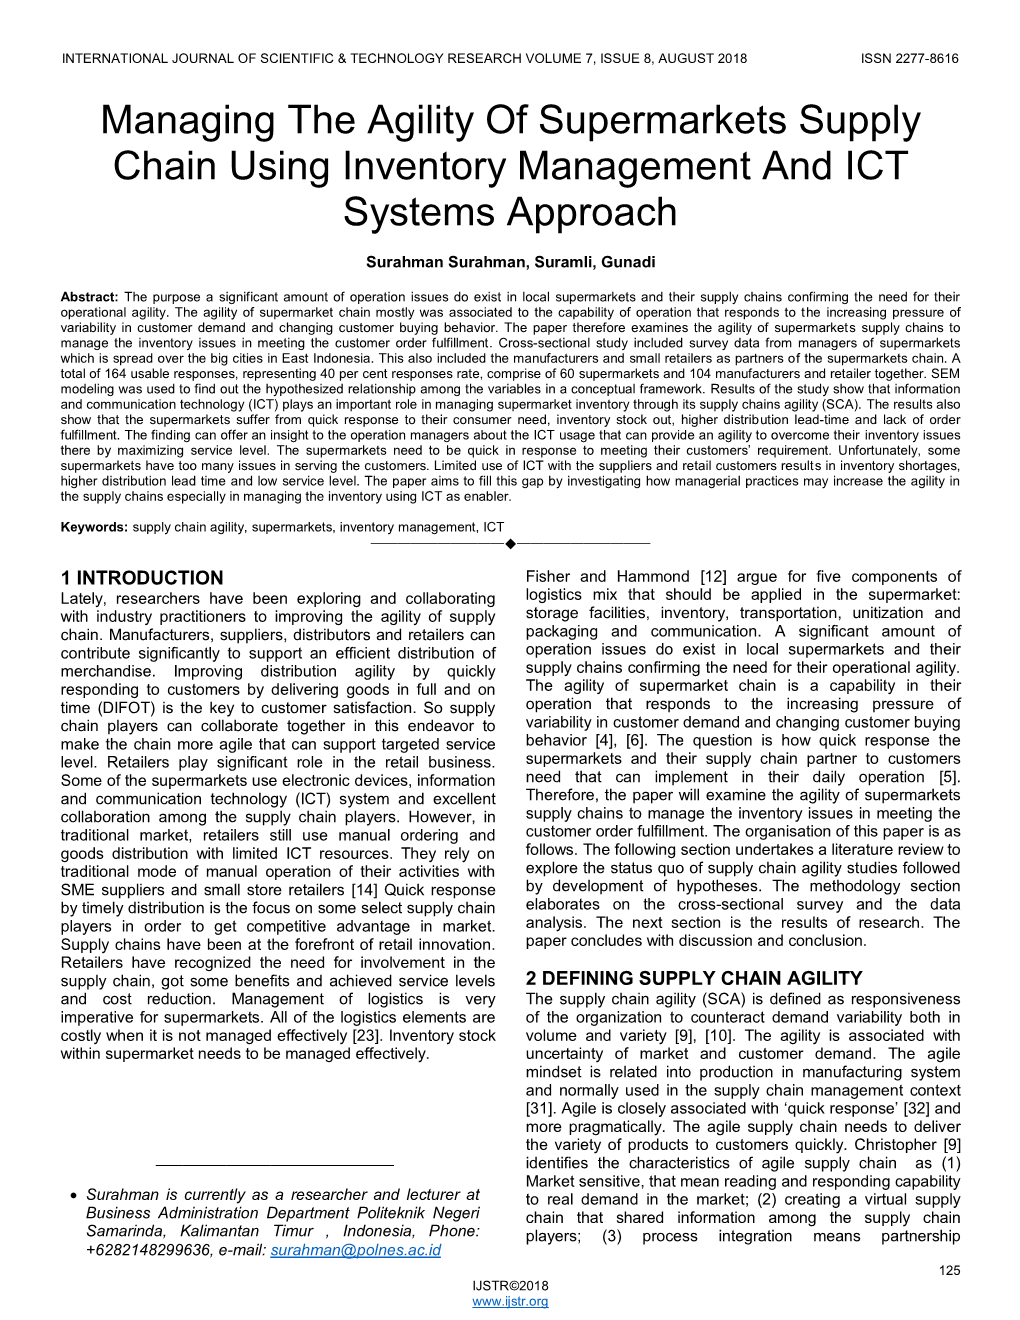 Managing the Agility of Supermarkets Supply Chain Using Inventory Management and ICT Systems Approach